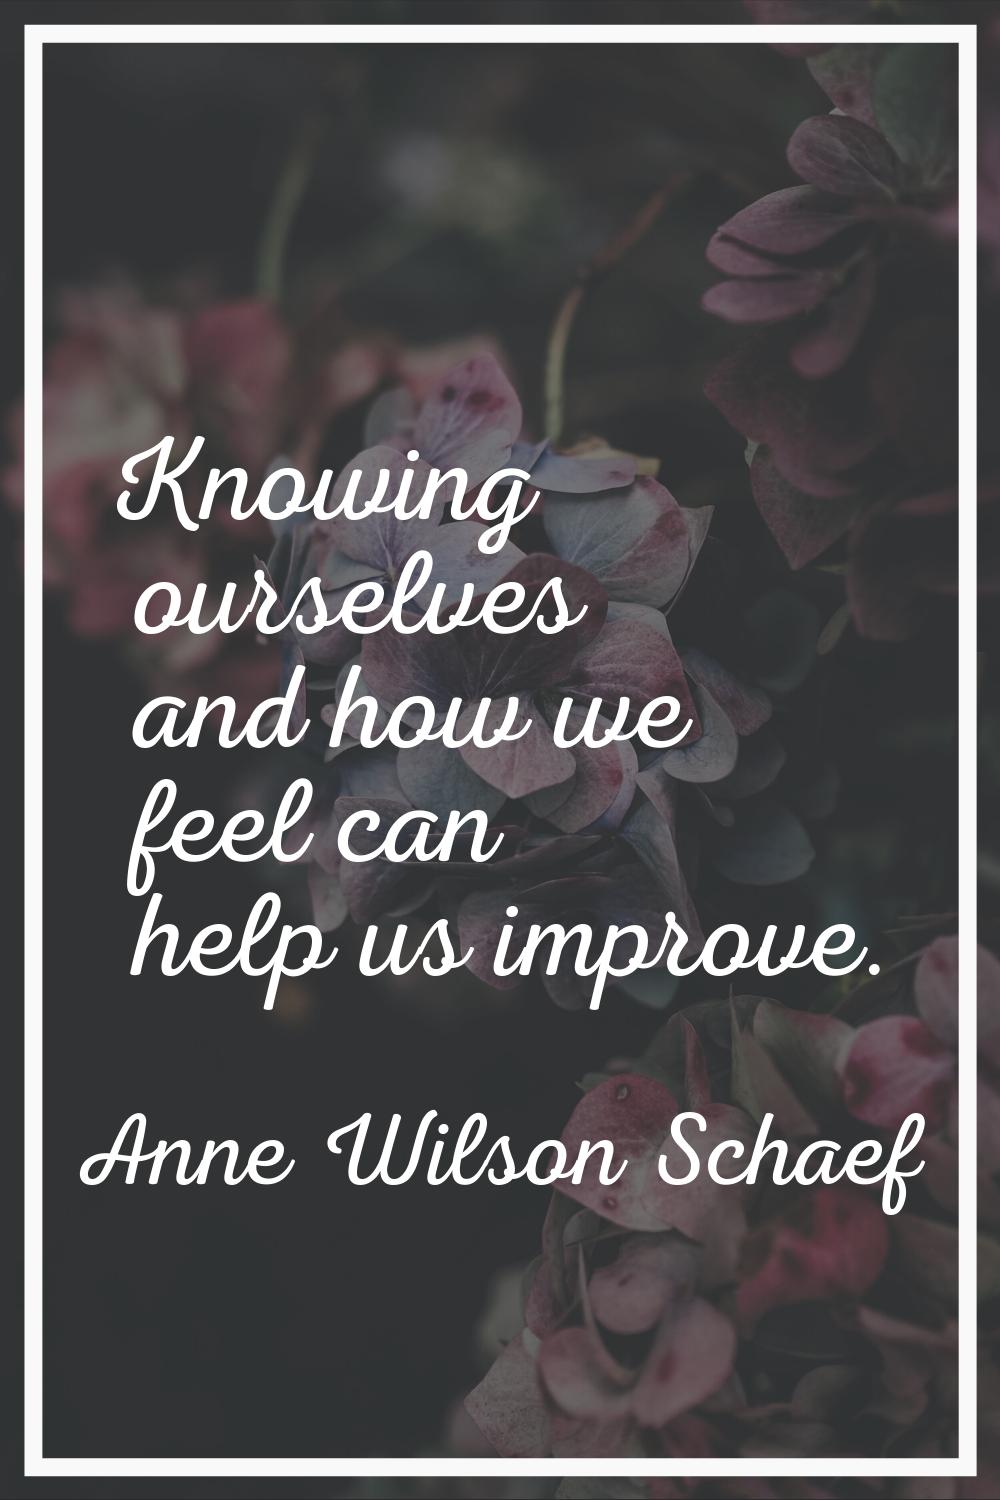 Knowing ourselves and how we feel can help us improve.